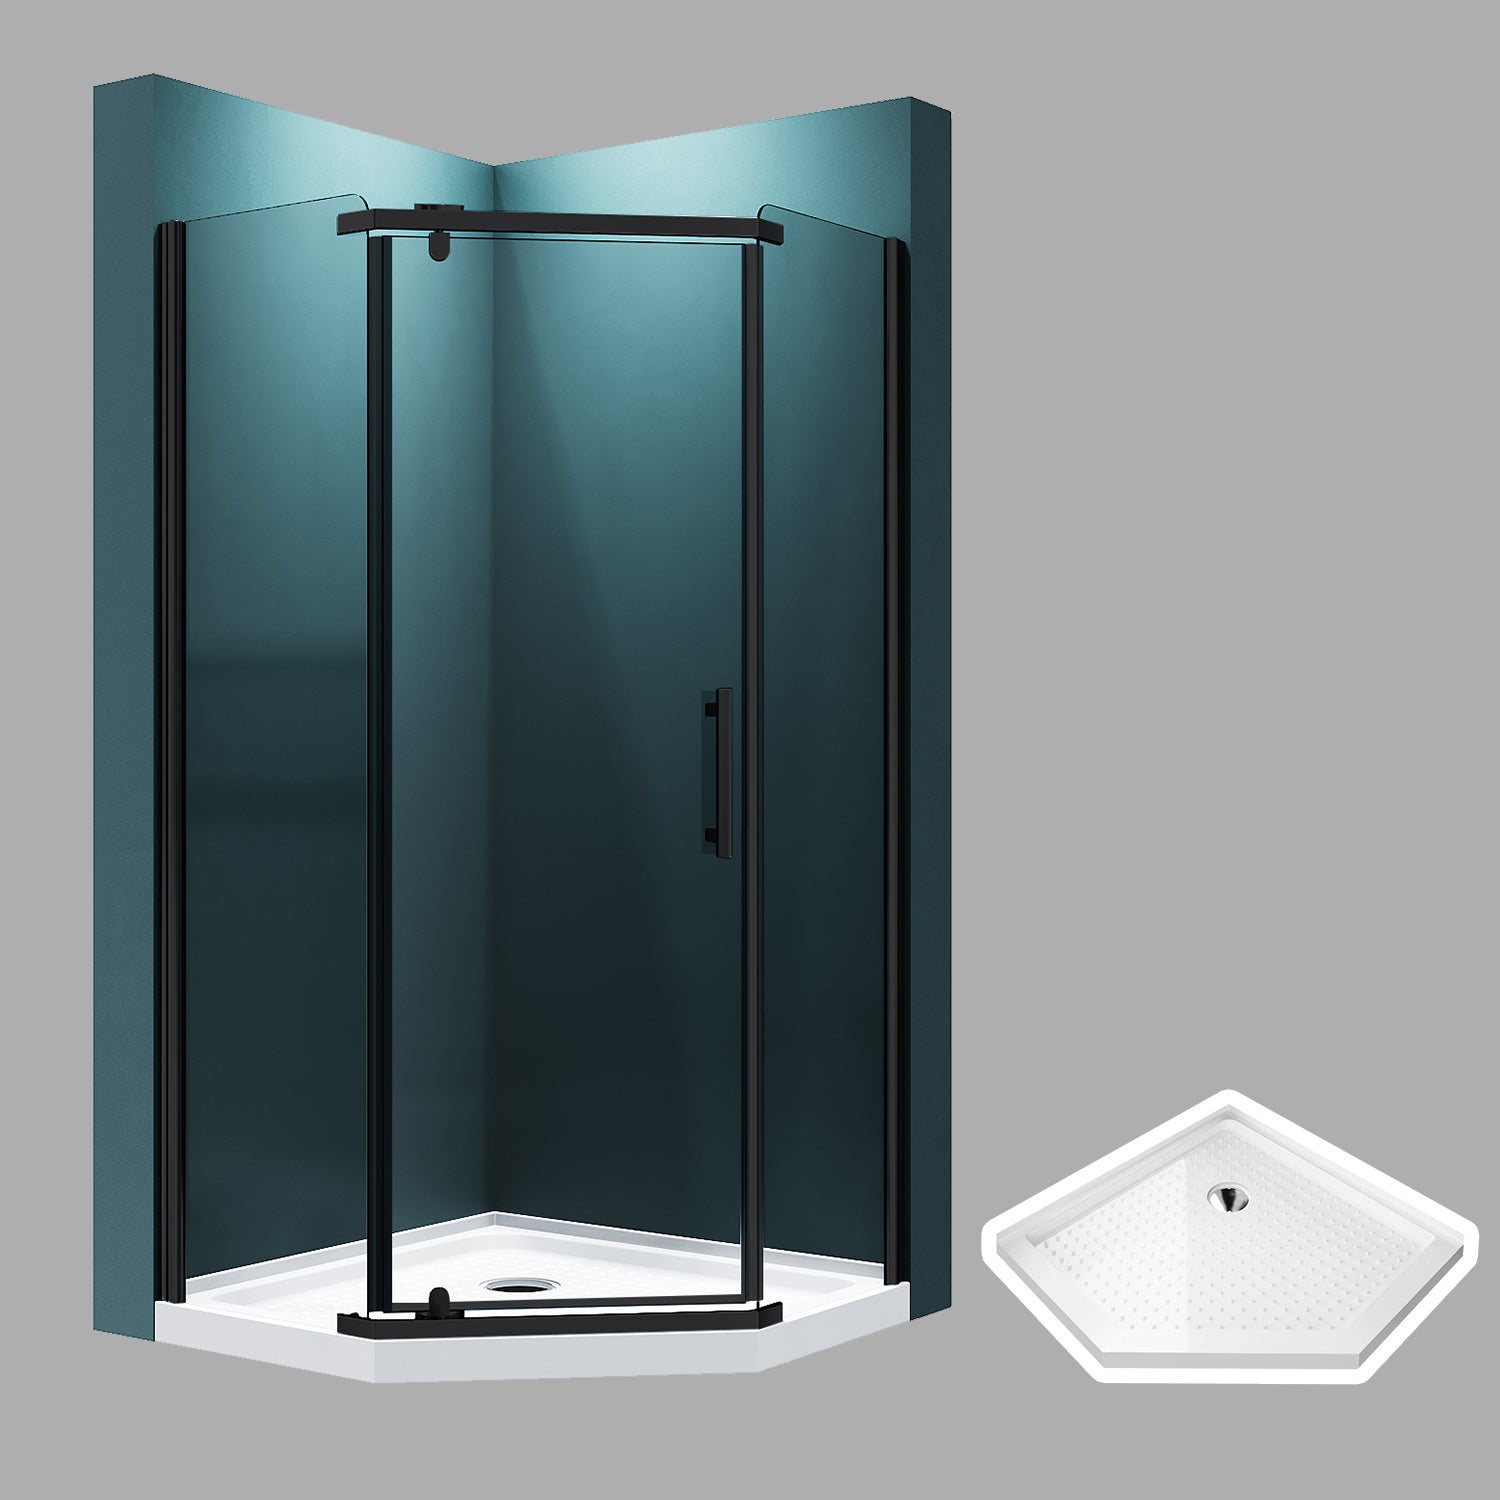 SUNNY SHOWER 38 in. W x 38 in. D x 72 in. H Black Finish Pivot Enclosures With Pivot Door And White Diamond Bases - SUNNY SHOWER